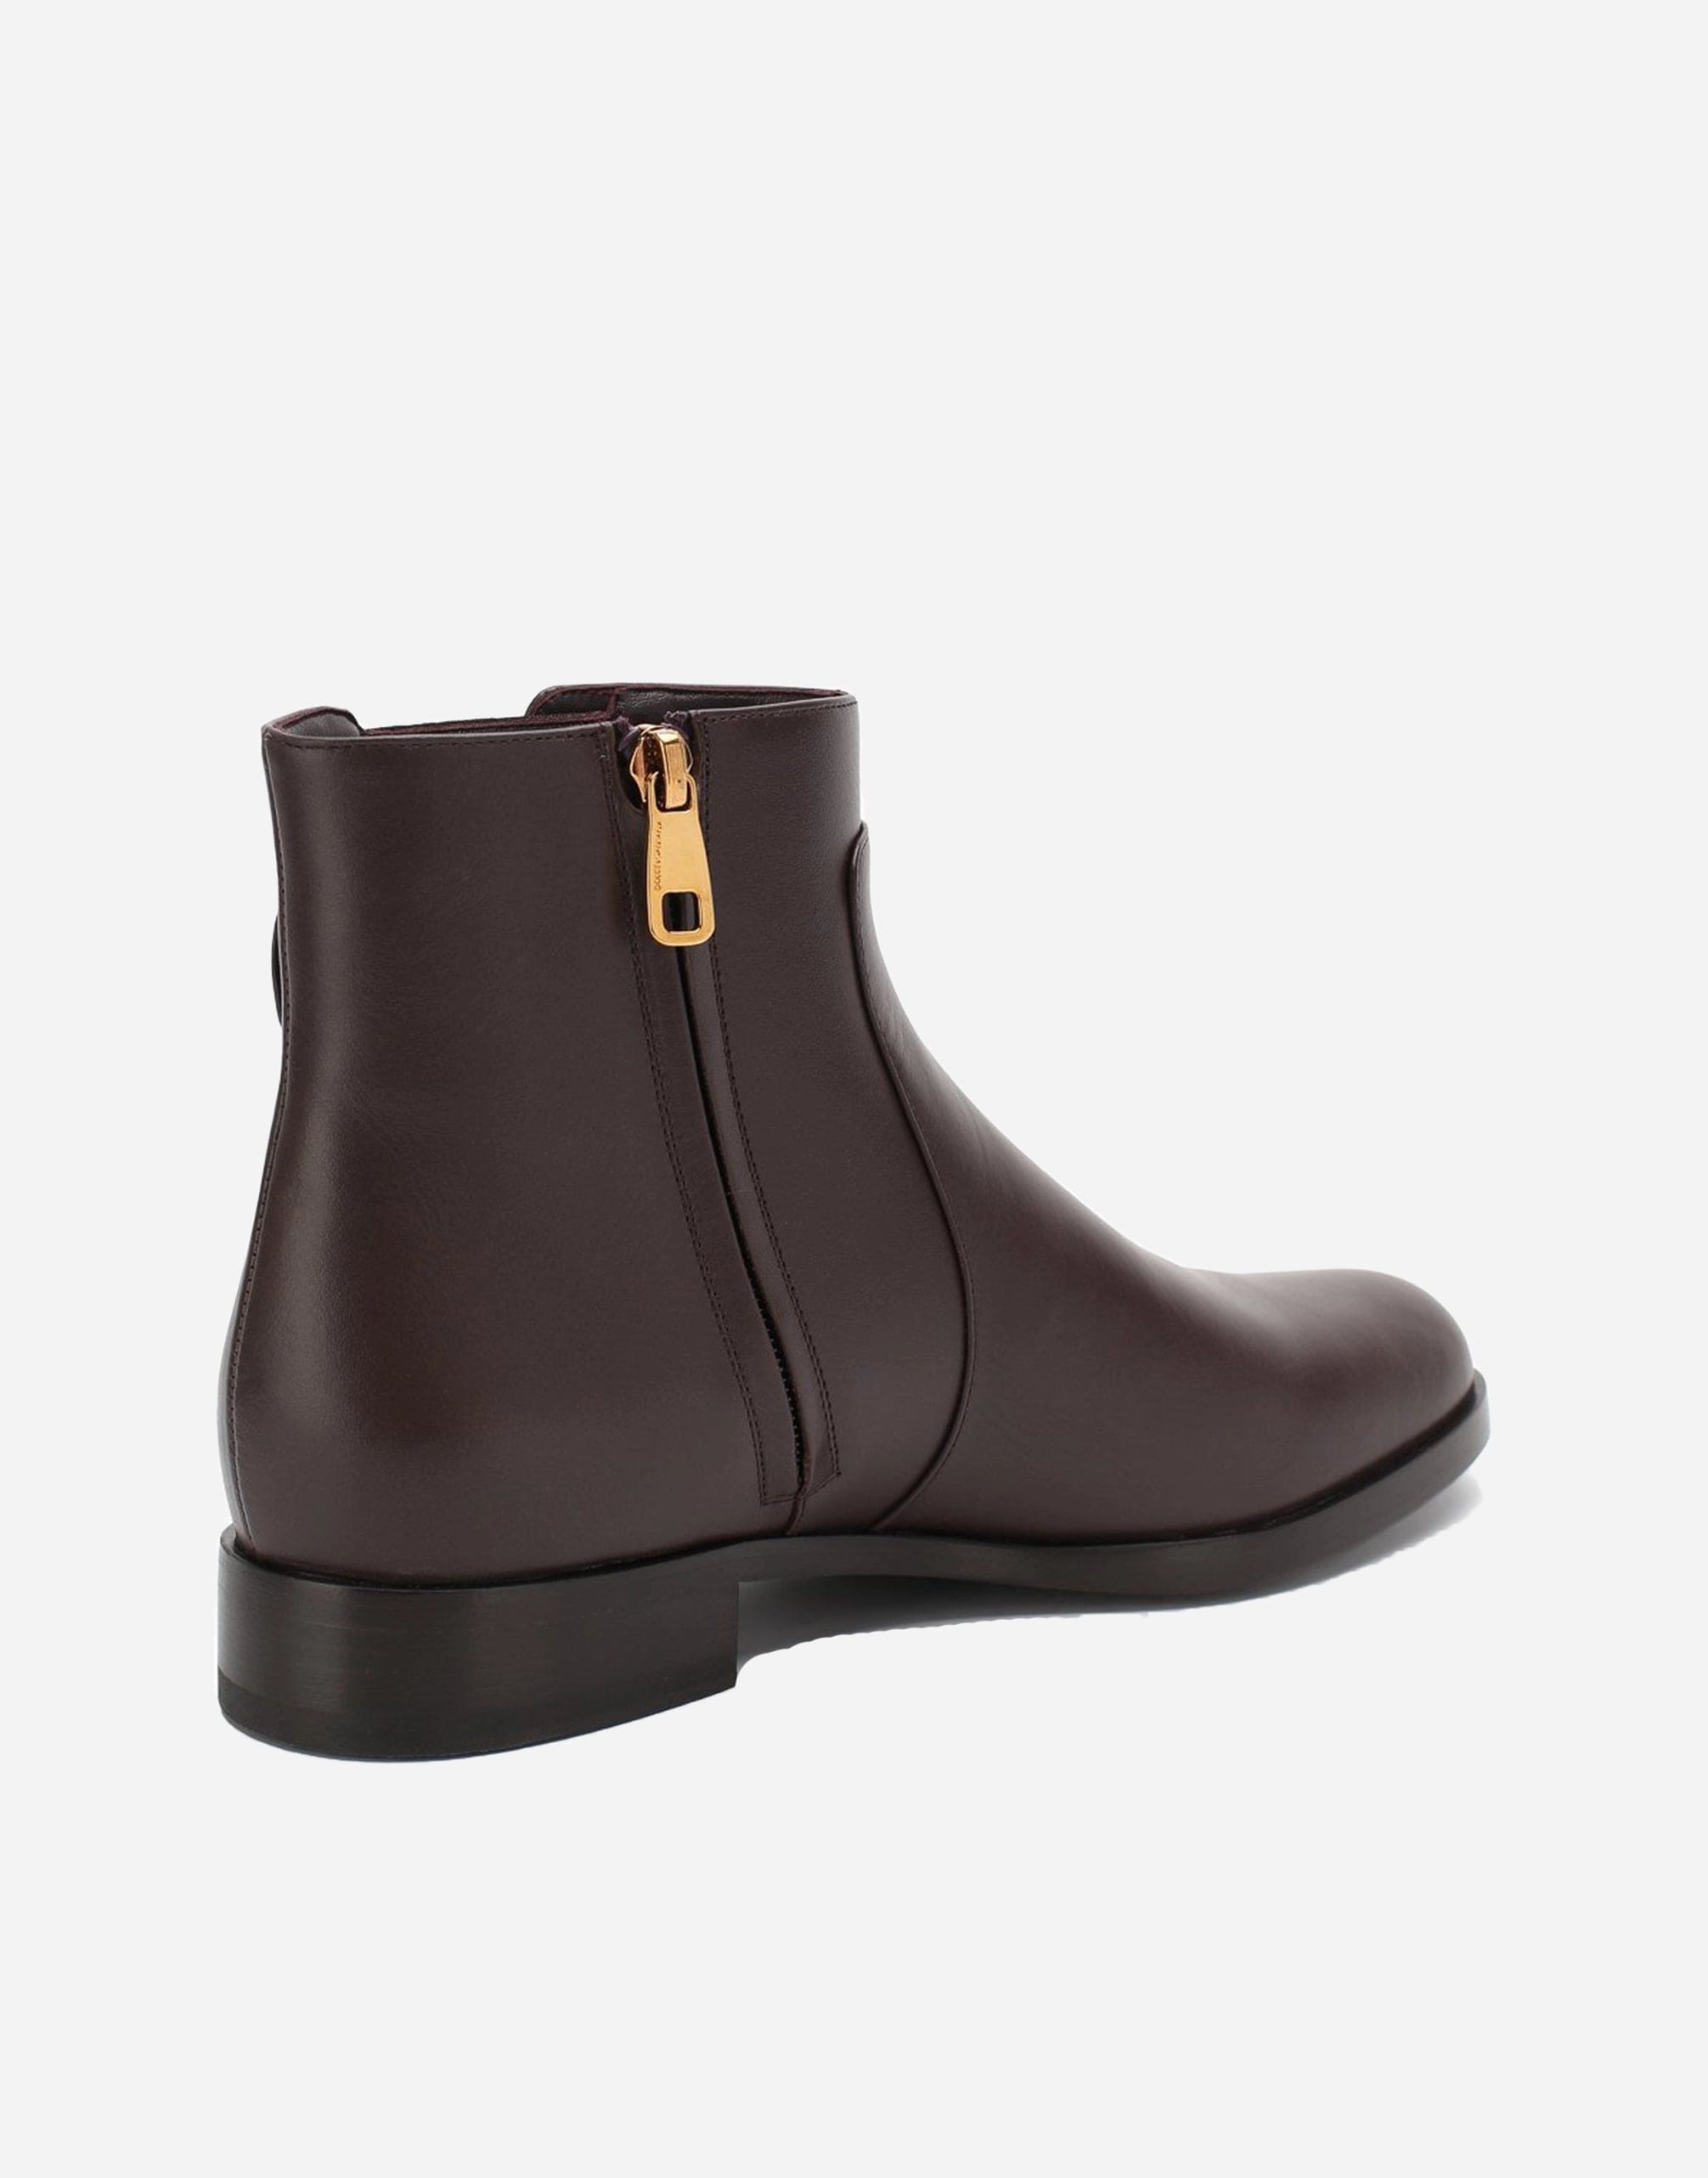 Dolce & Gabbana Logo Leather Chelsea Boots